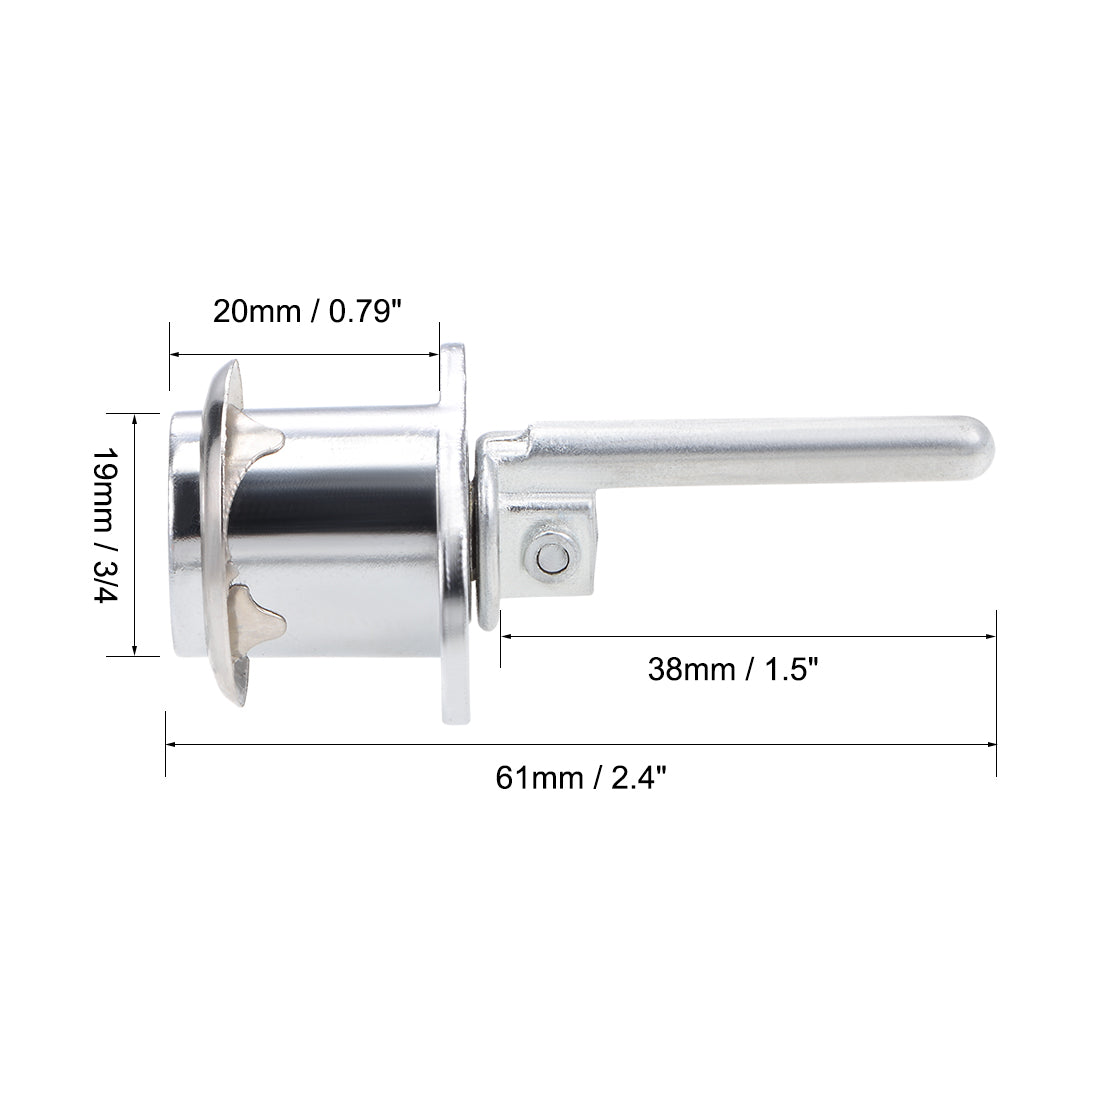 uxcell Uxcell Drawer Lock 19mm Cylinder Diameter for Desk Cabinet Locker Showcase Silver 2Pcs